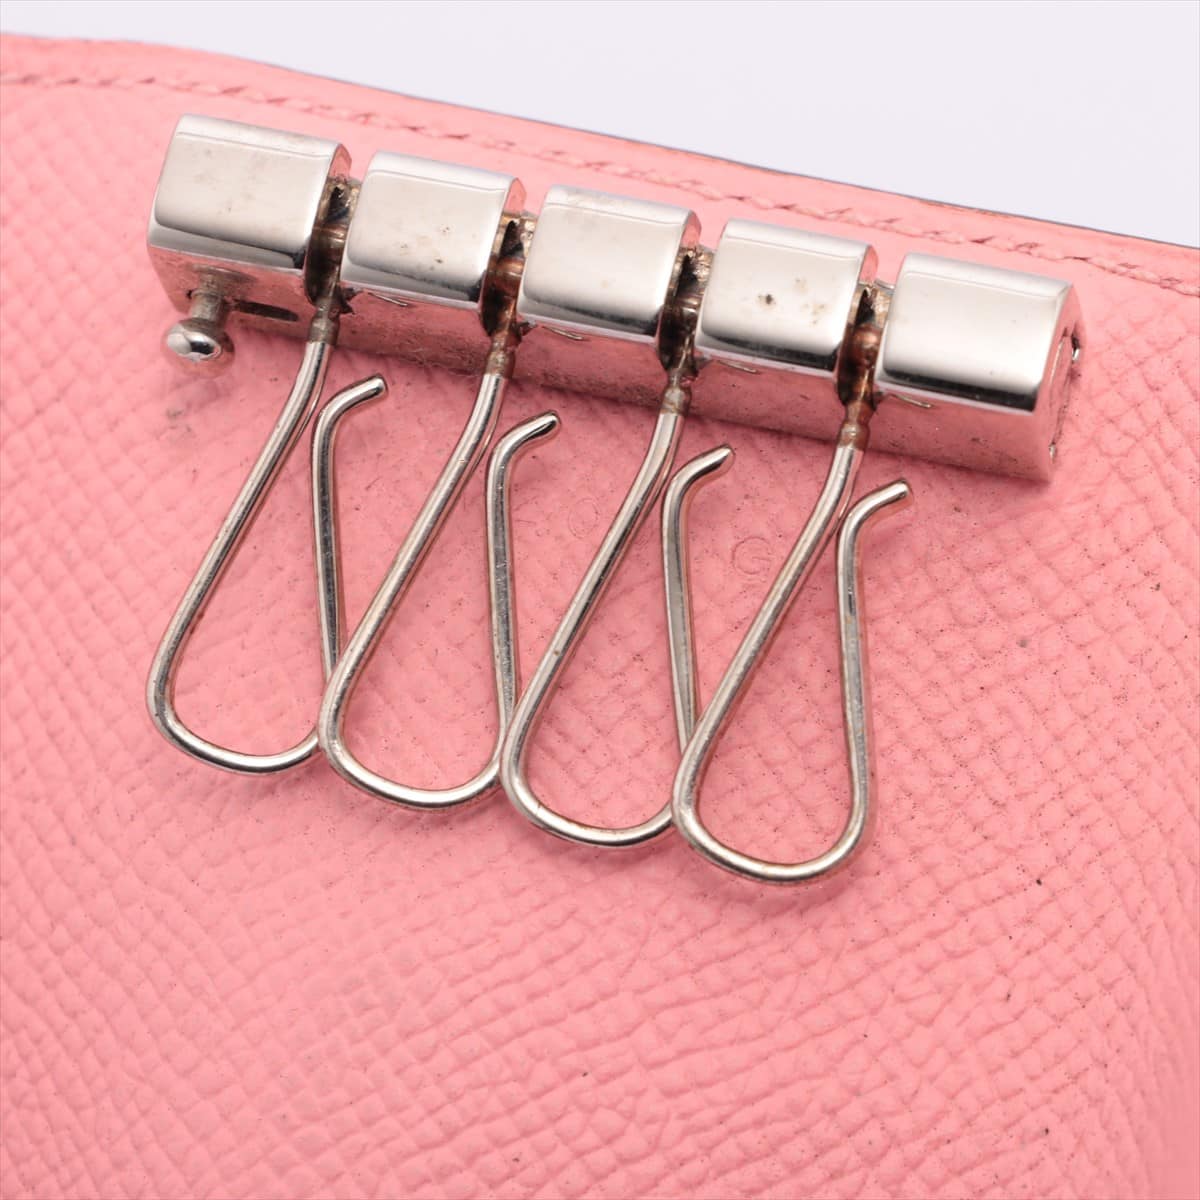 Hermès Bearn Key Case Veau Epsom Key case Pink Silver Metal fittings X: 2016 The tip of the strap is peeled off